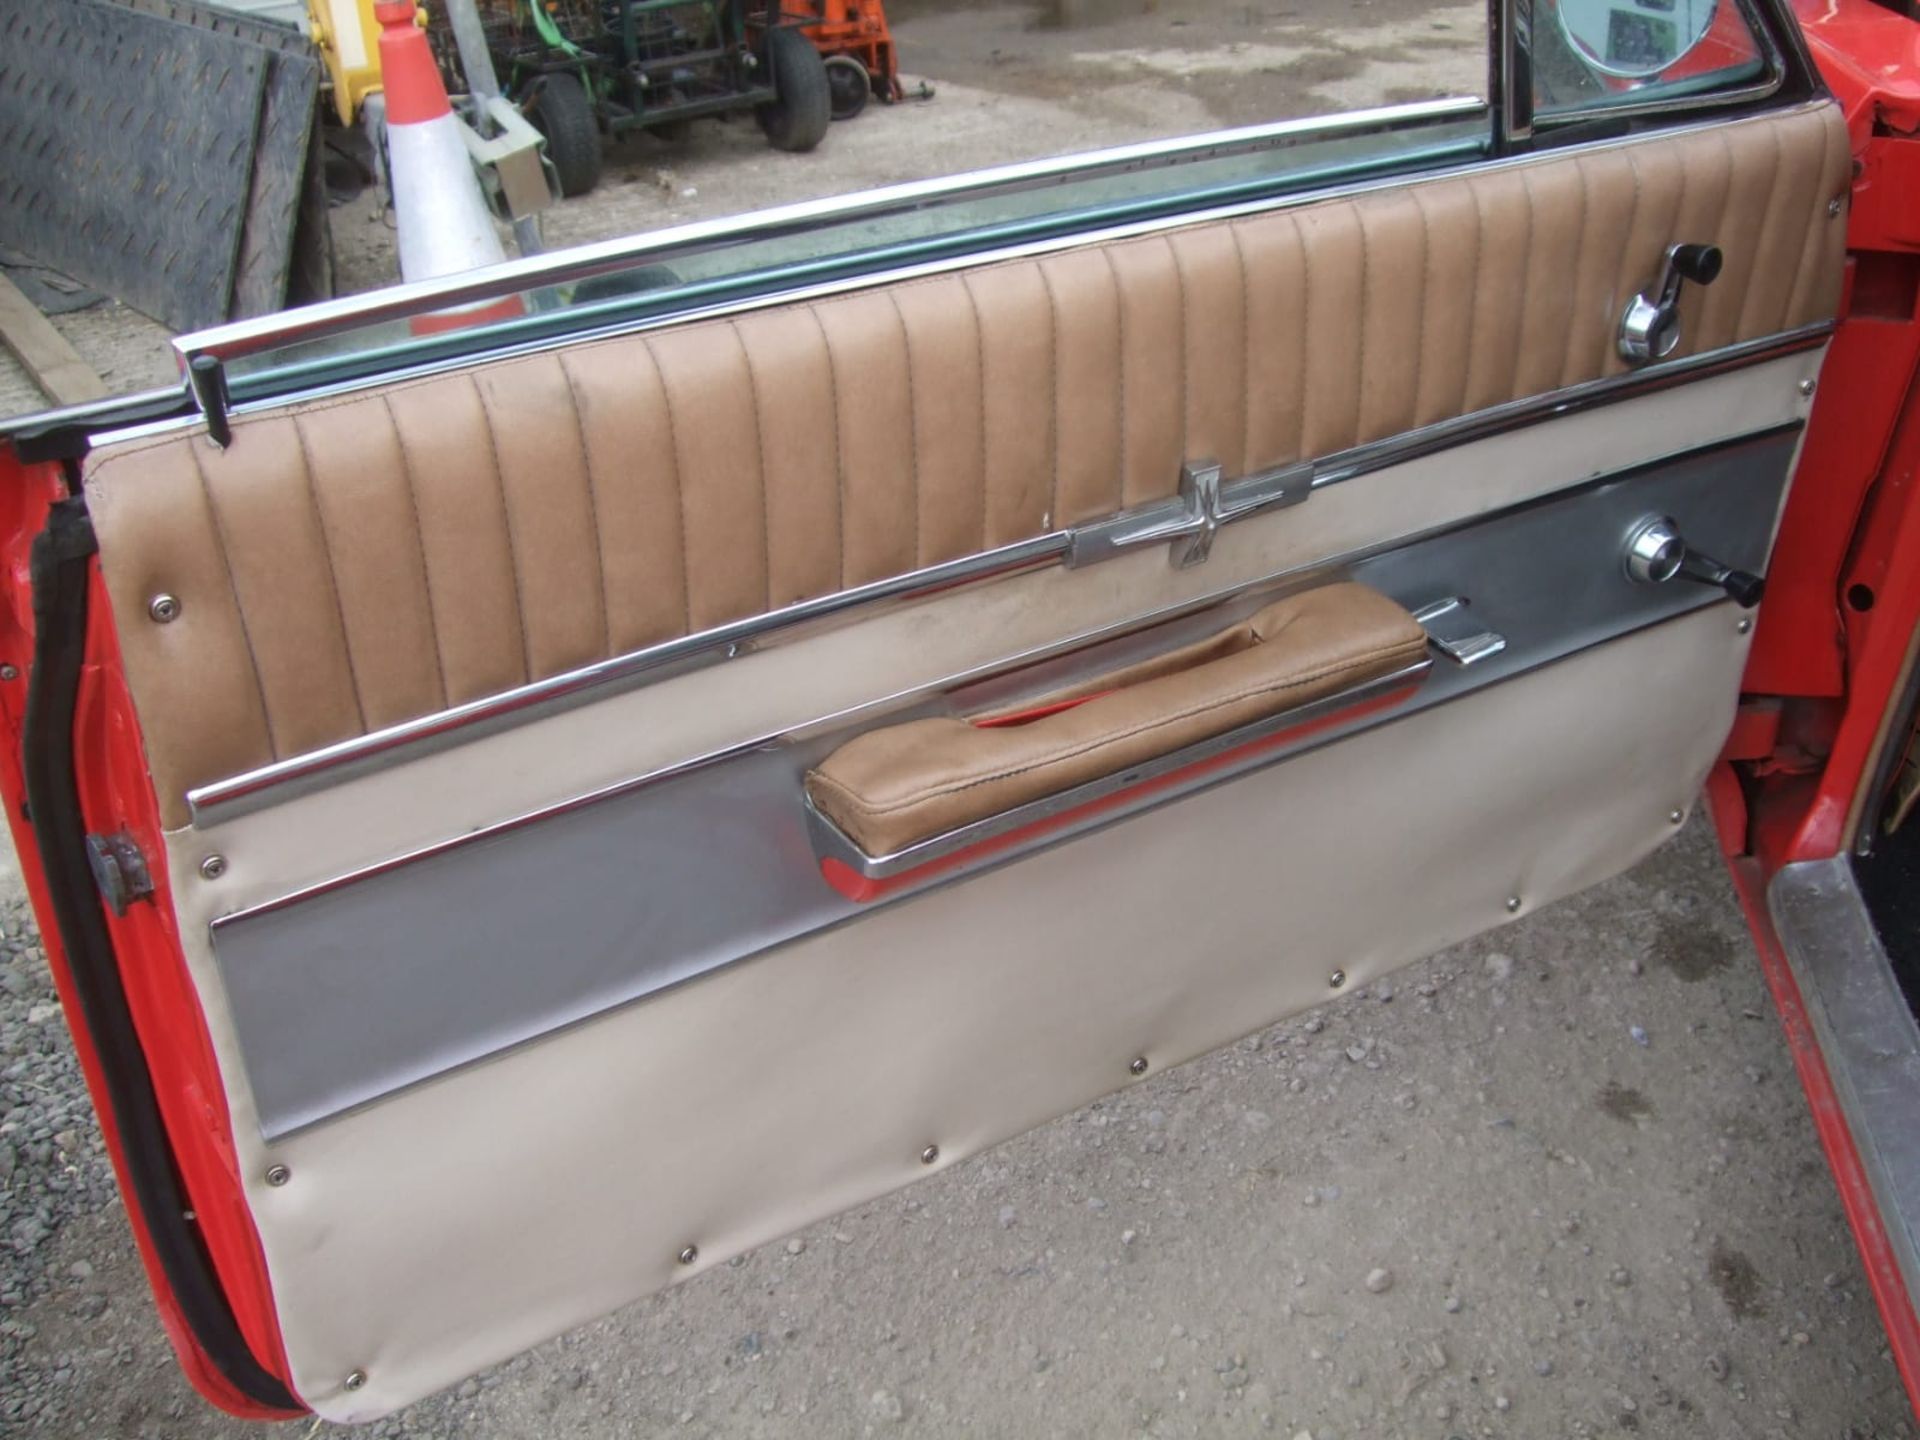 1963 OLDSMOBILE, STARFIRE COUPE, RARE CAR! SHOWING 71,026 MILES, MOT AND TAX EXEMPT *NO VAT* - Image 10 of 11